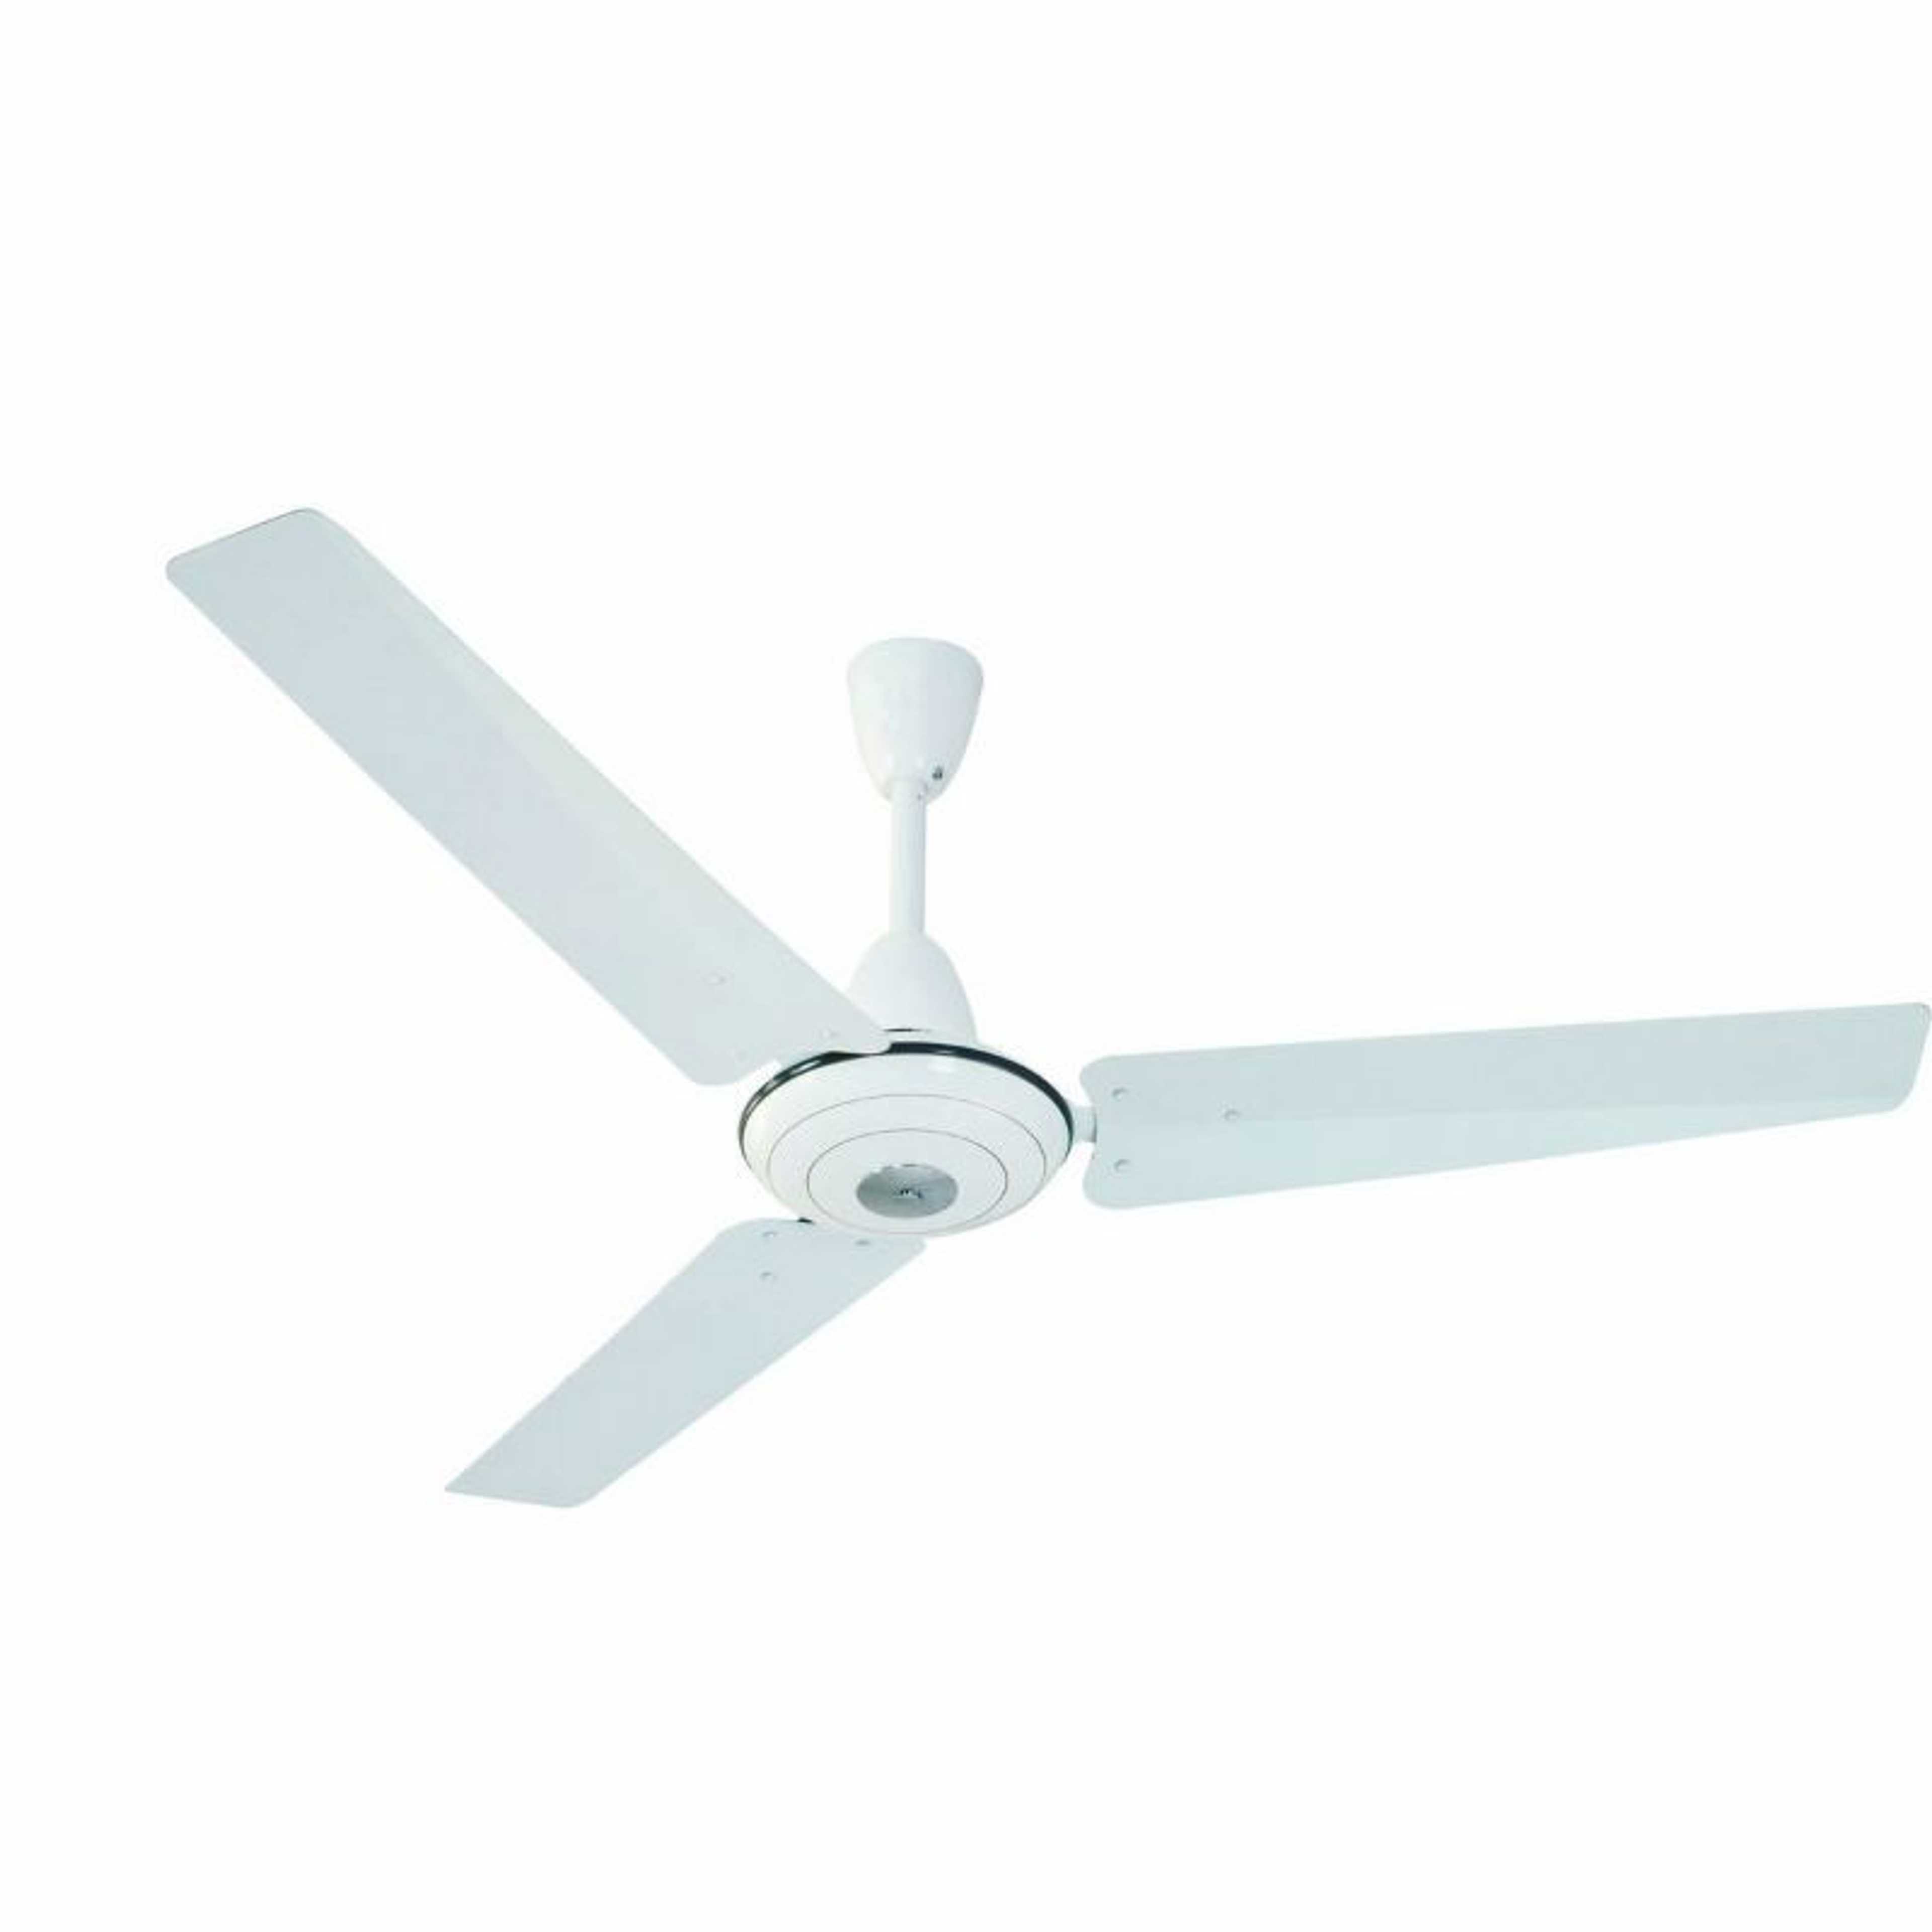 Ceiling Fan Economy Model with 1 Year Brand Warranty - 56inch White/Off-White